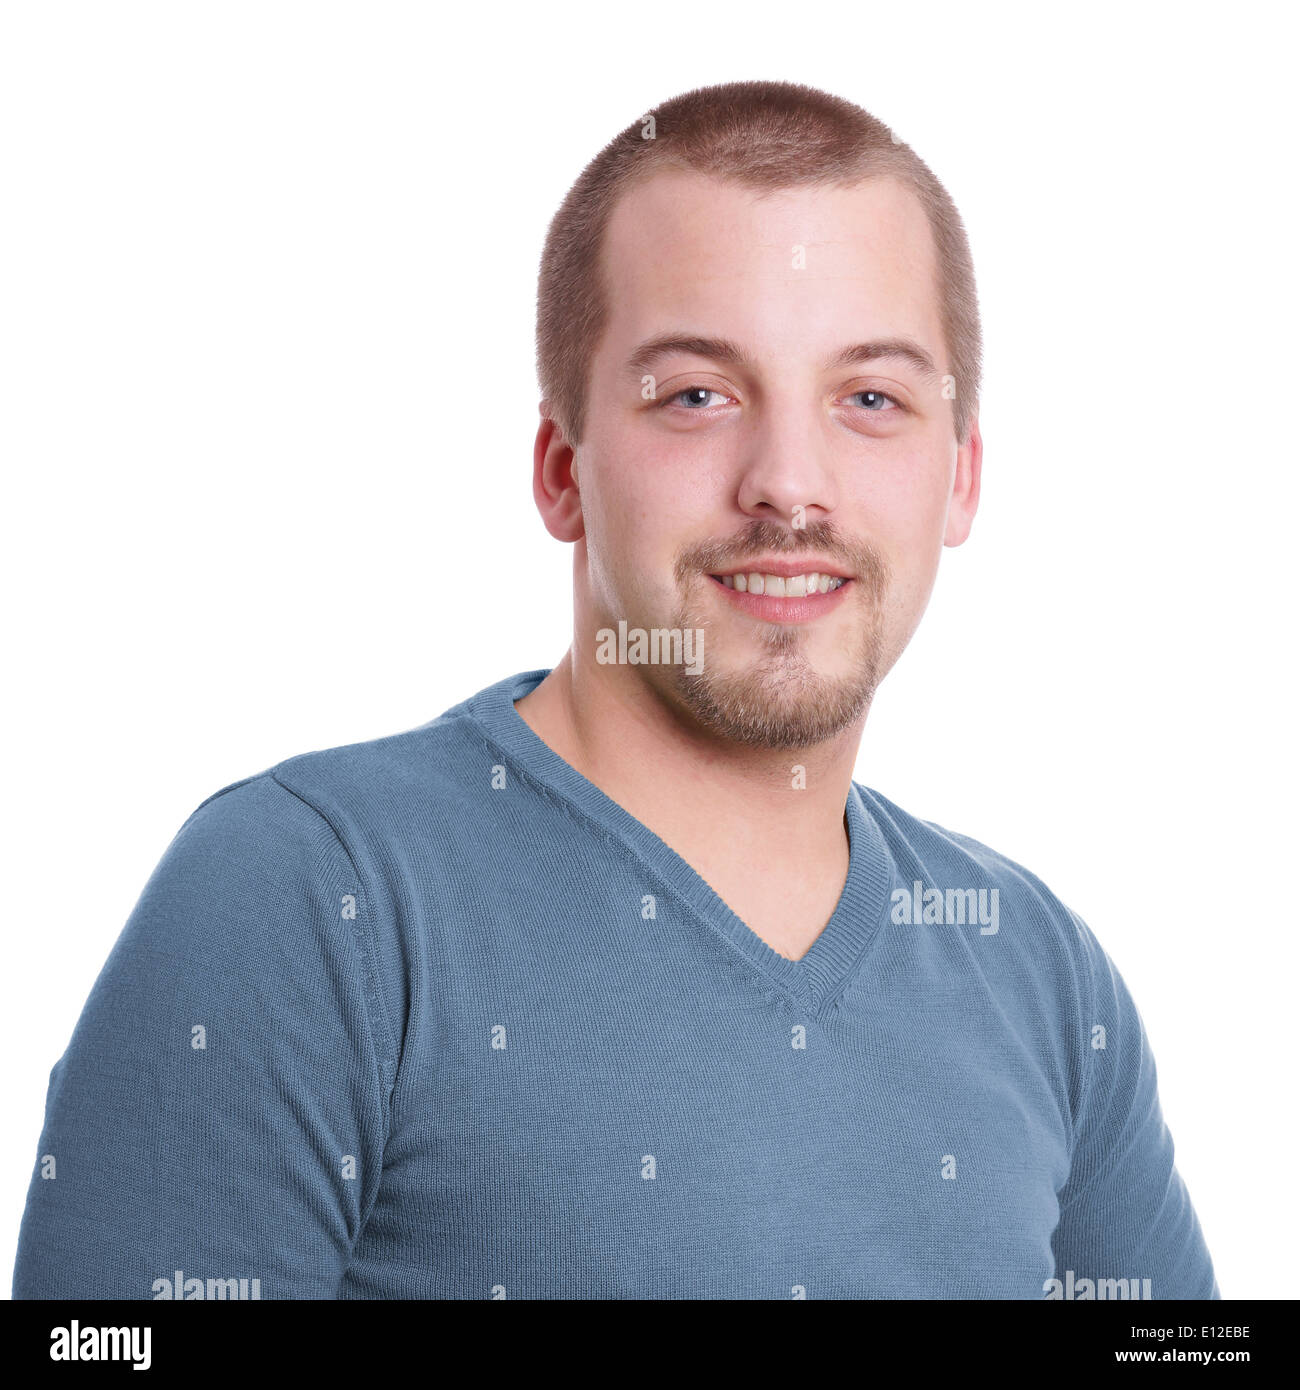 young man with goatee beard Stock Photo